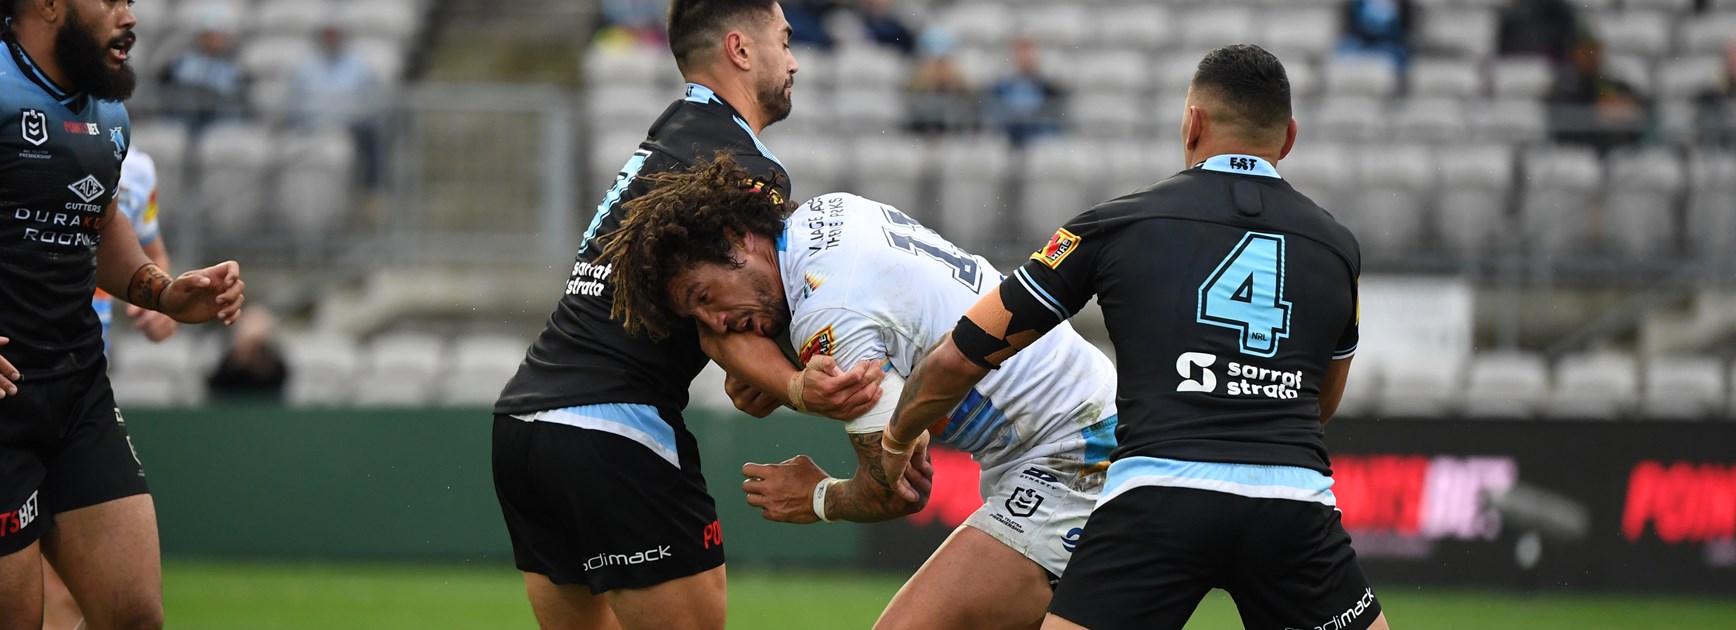 'There was no bite': Gallen adamant Proctor hard done by